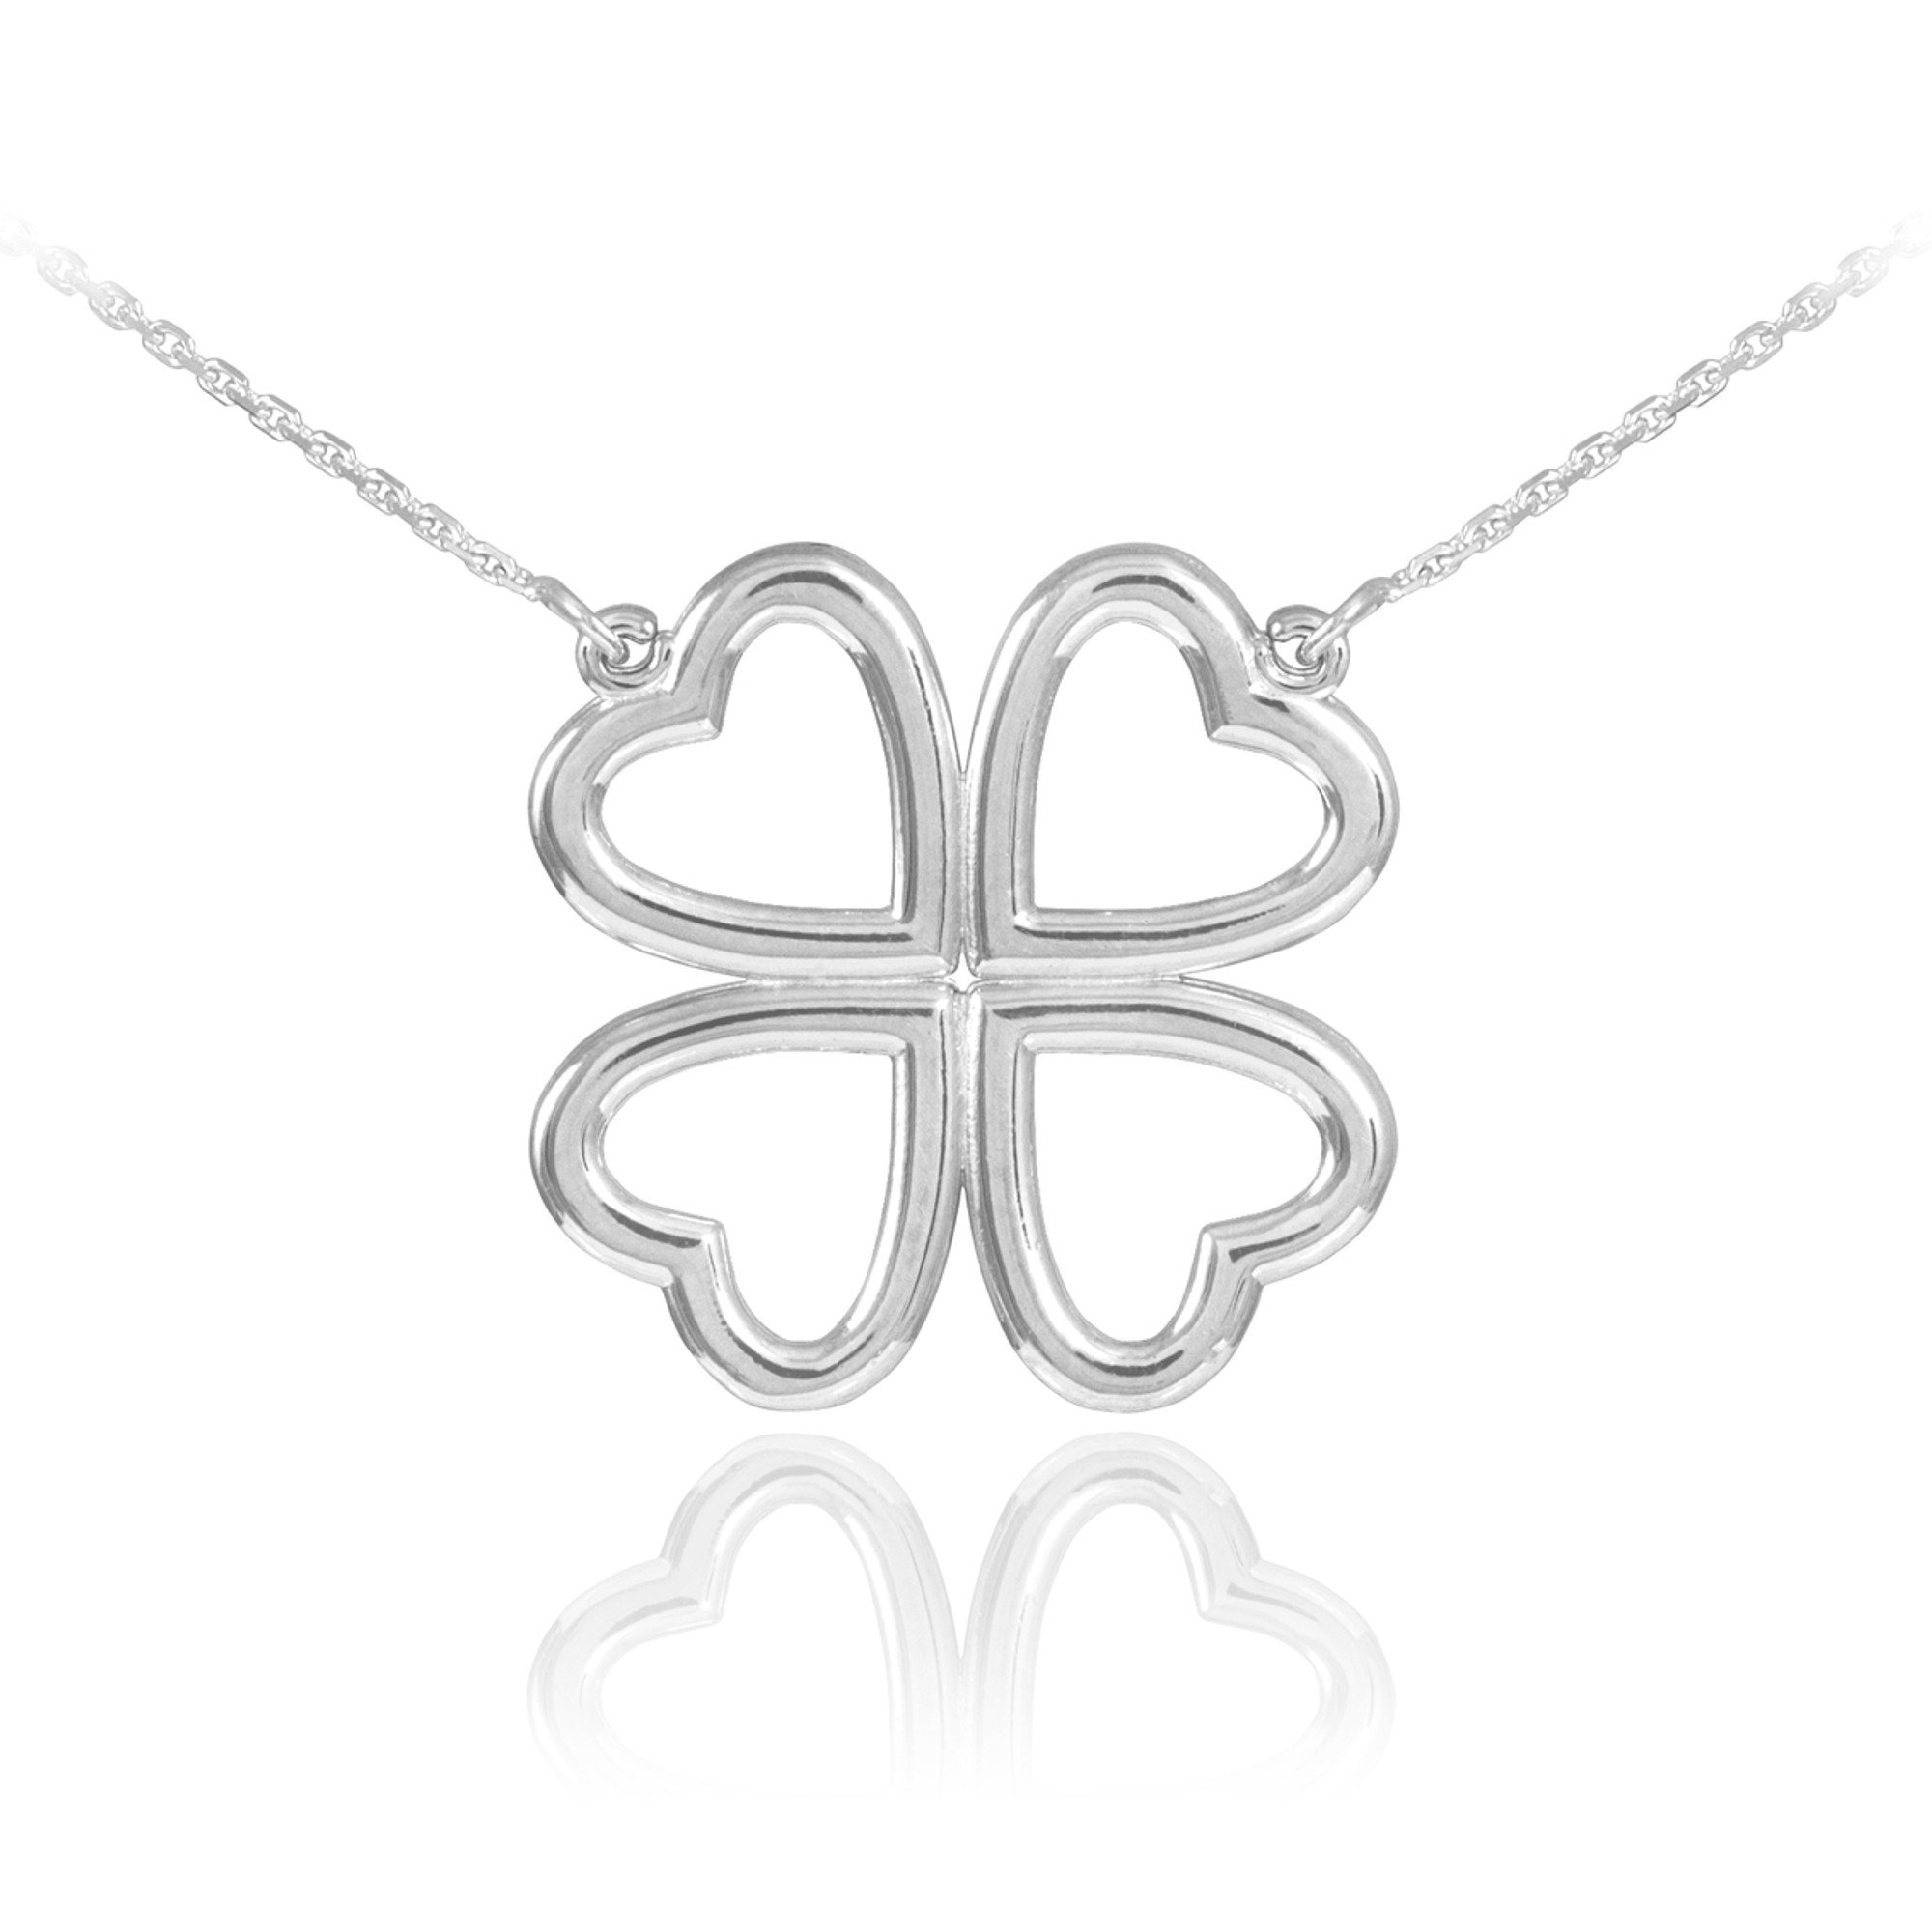 Four Leaf Clover Necklace, Silver Celtic Pendant, Lucky Charm Necklace -  Etsy | Bohemian jewelry, Boho chic jewelry, Silver birthstone jewelry